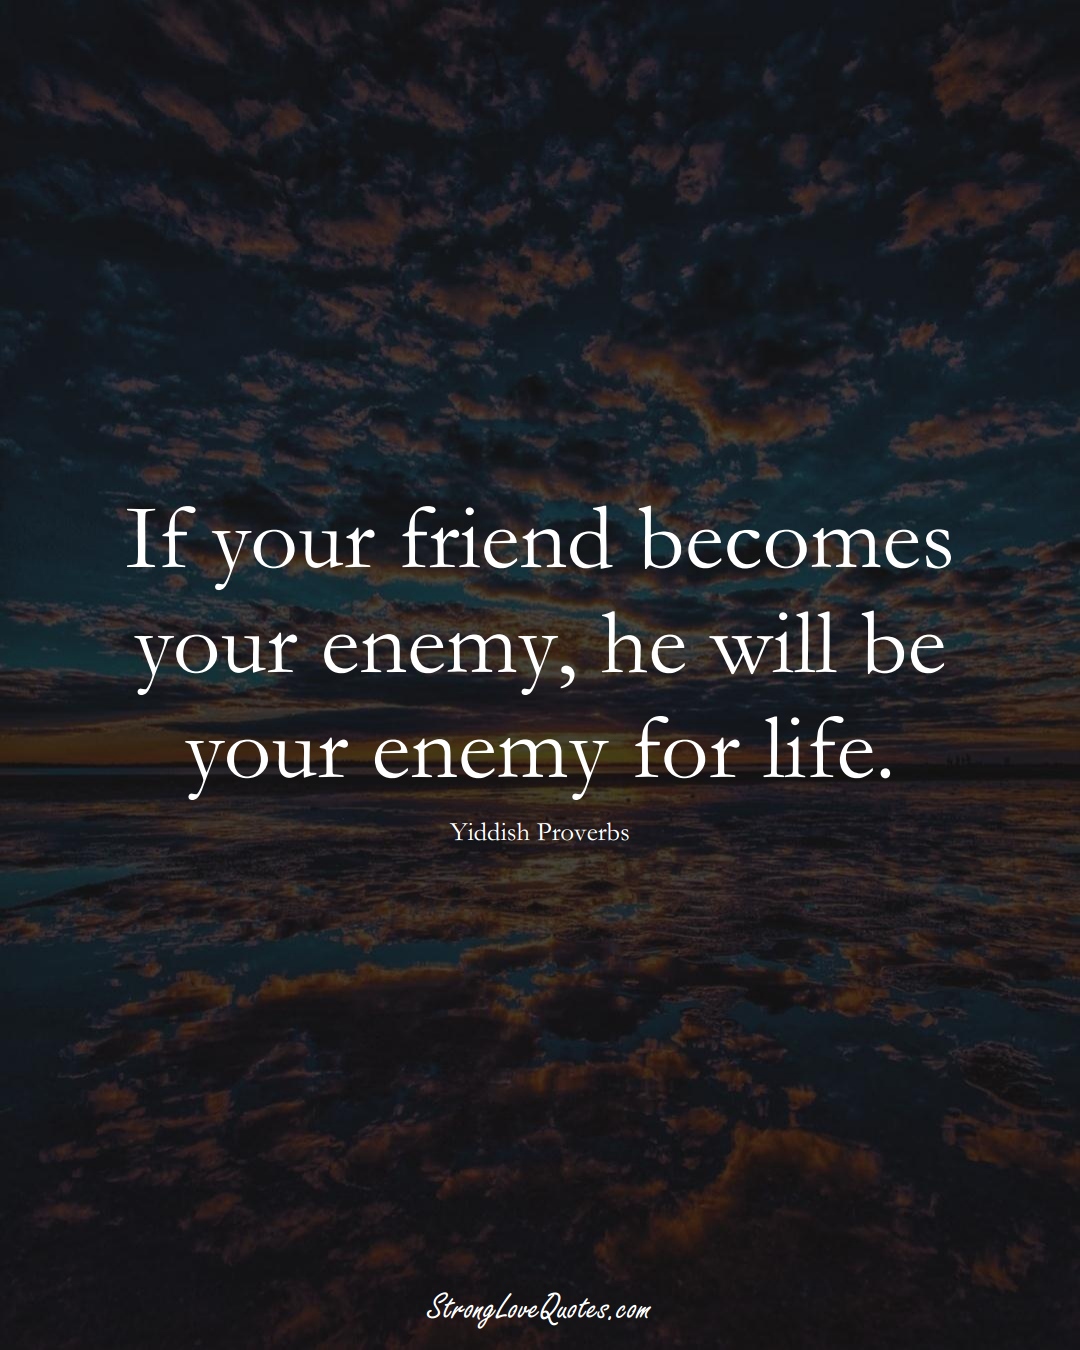 If your friend becomes your enemy, he will be your enemy for life. (Yiddish Sayings);  #aVarietyofCulturesSayings